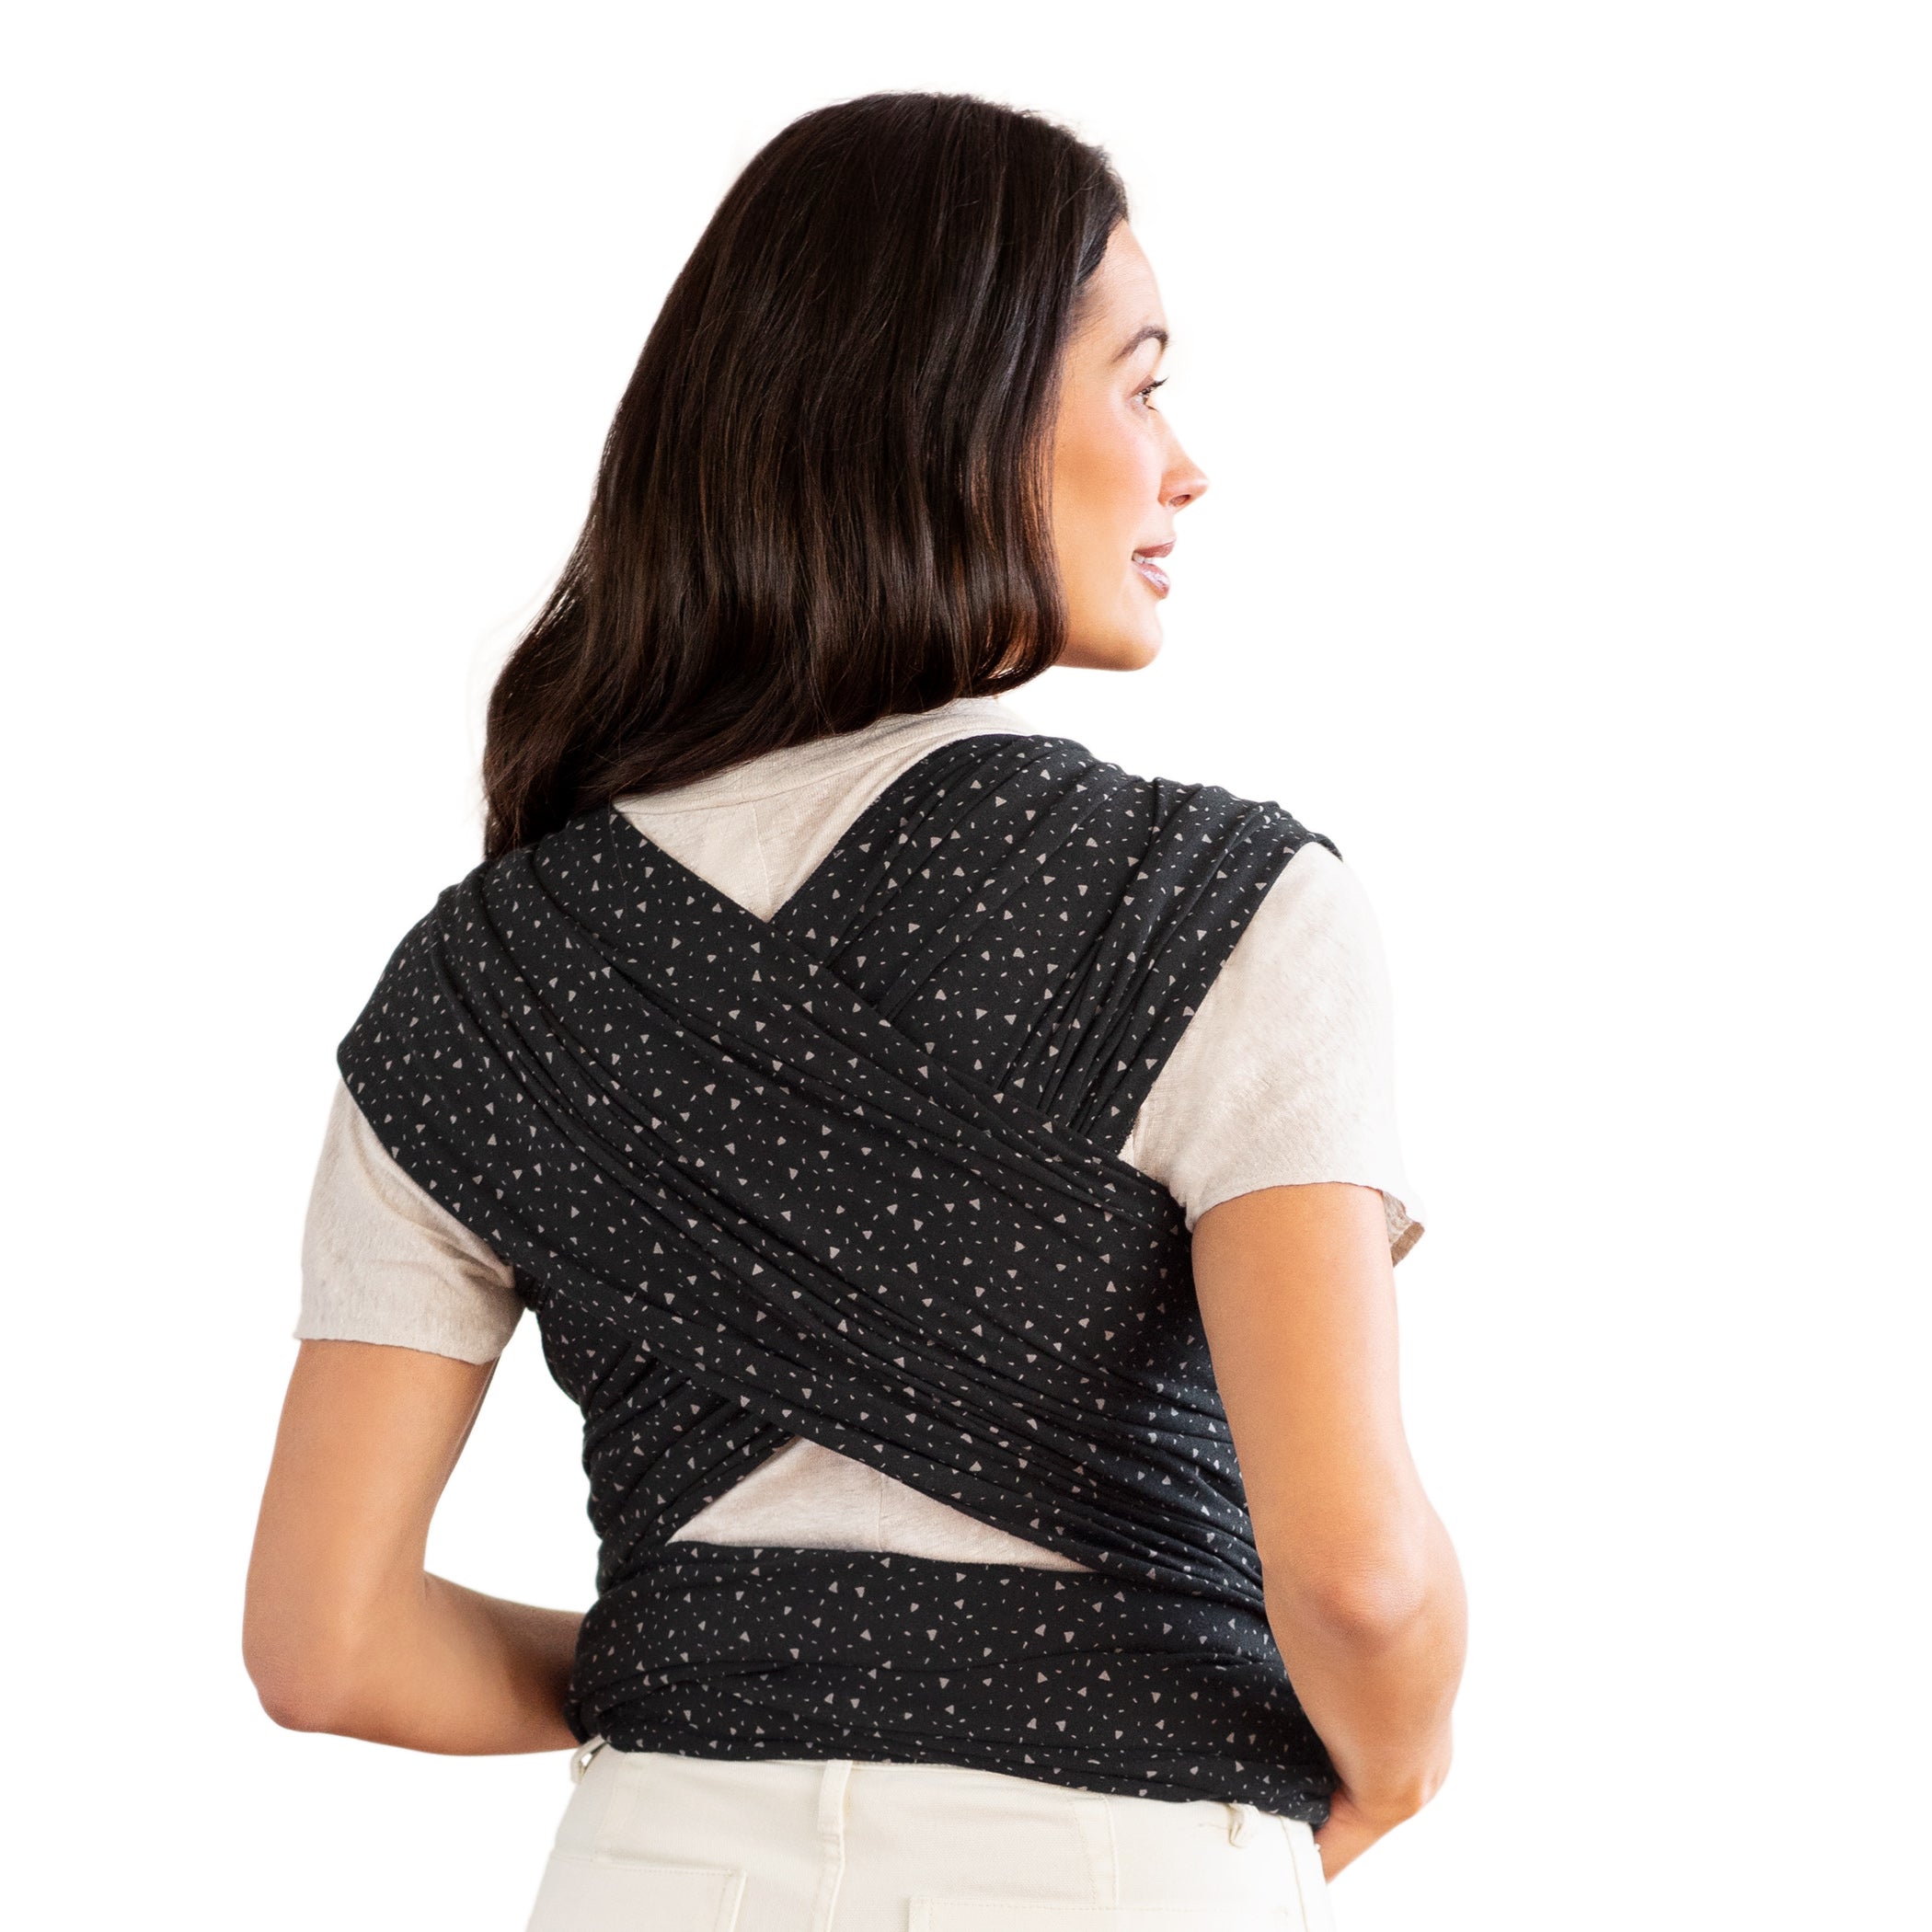 Classic Wrap Baby Carrier by Petunia Pickle Bottom - Terrazzo